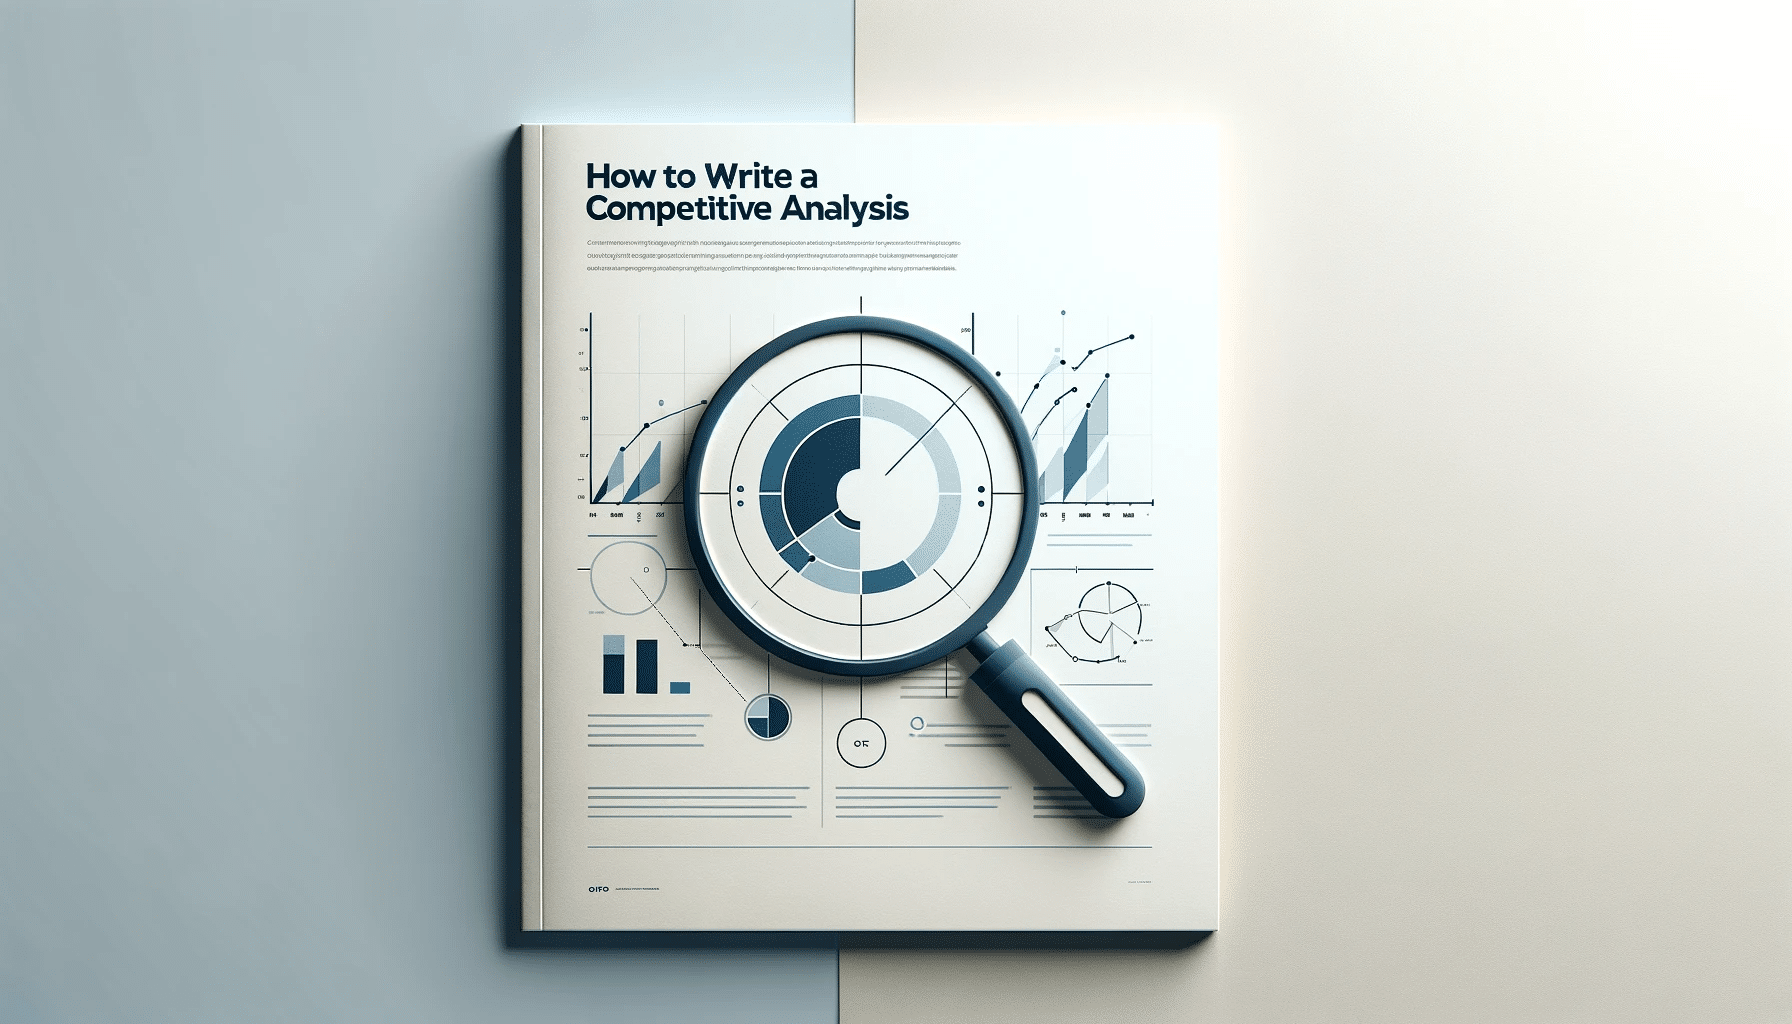 How to Write a Competitive Analysis